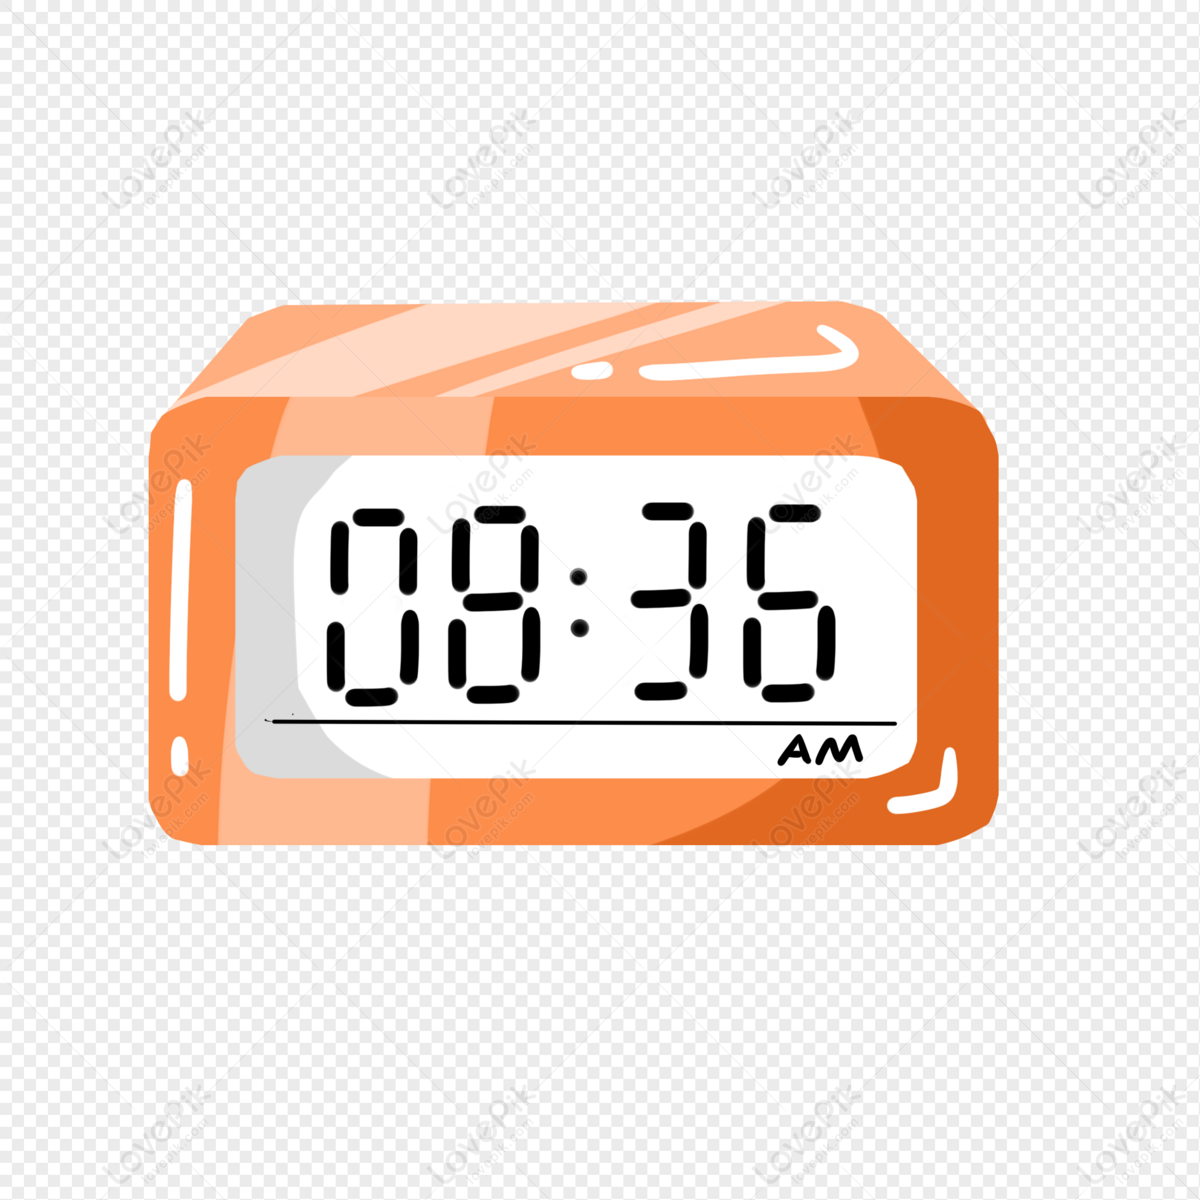 Cartoon Various Alarm Clocks PNG Transparent Background And Clipart Image  For Free Download - Lovepik | 401423790